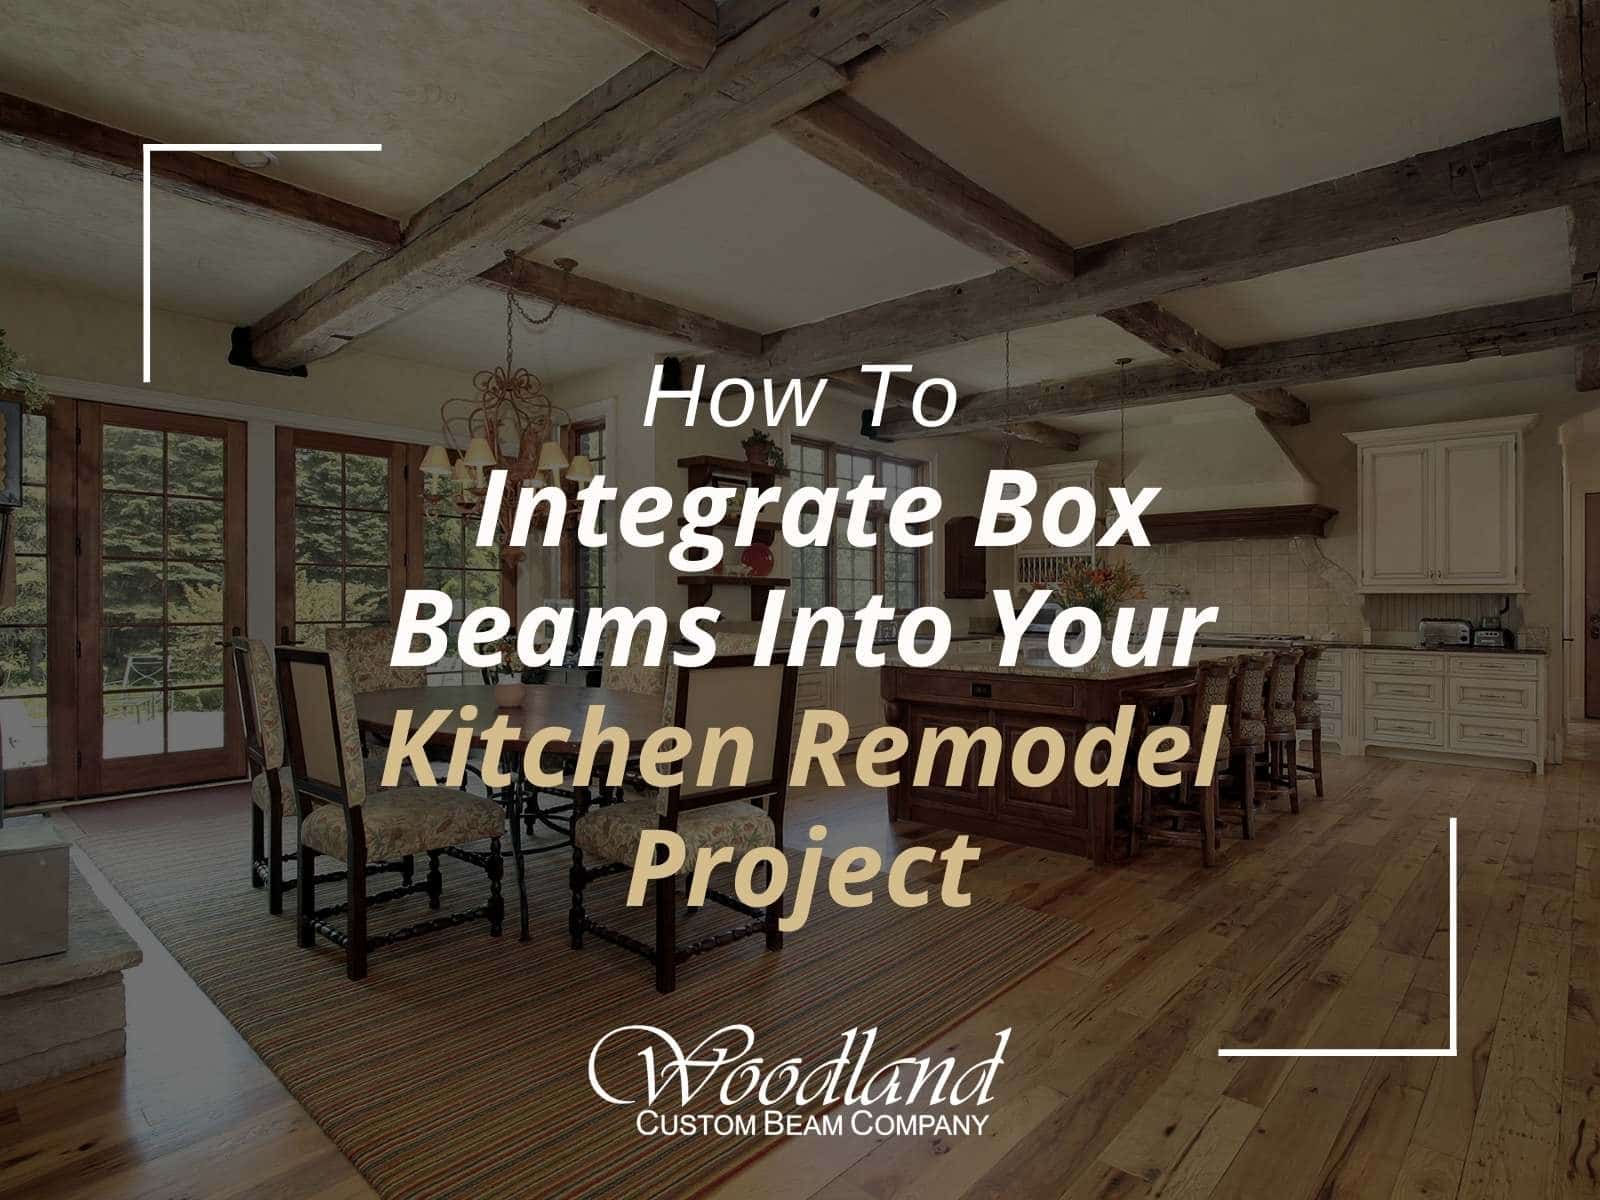 How To Integrate Box Beams Into Your Kitchen Remodel Project